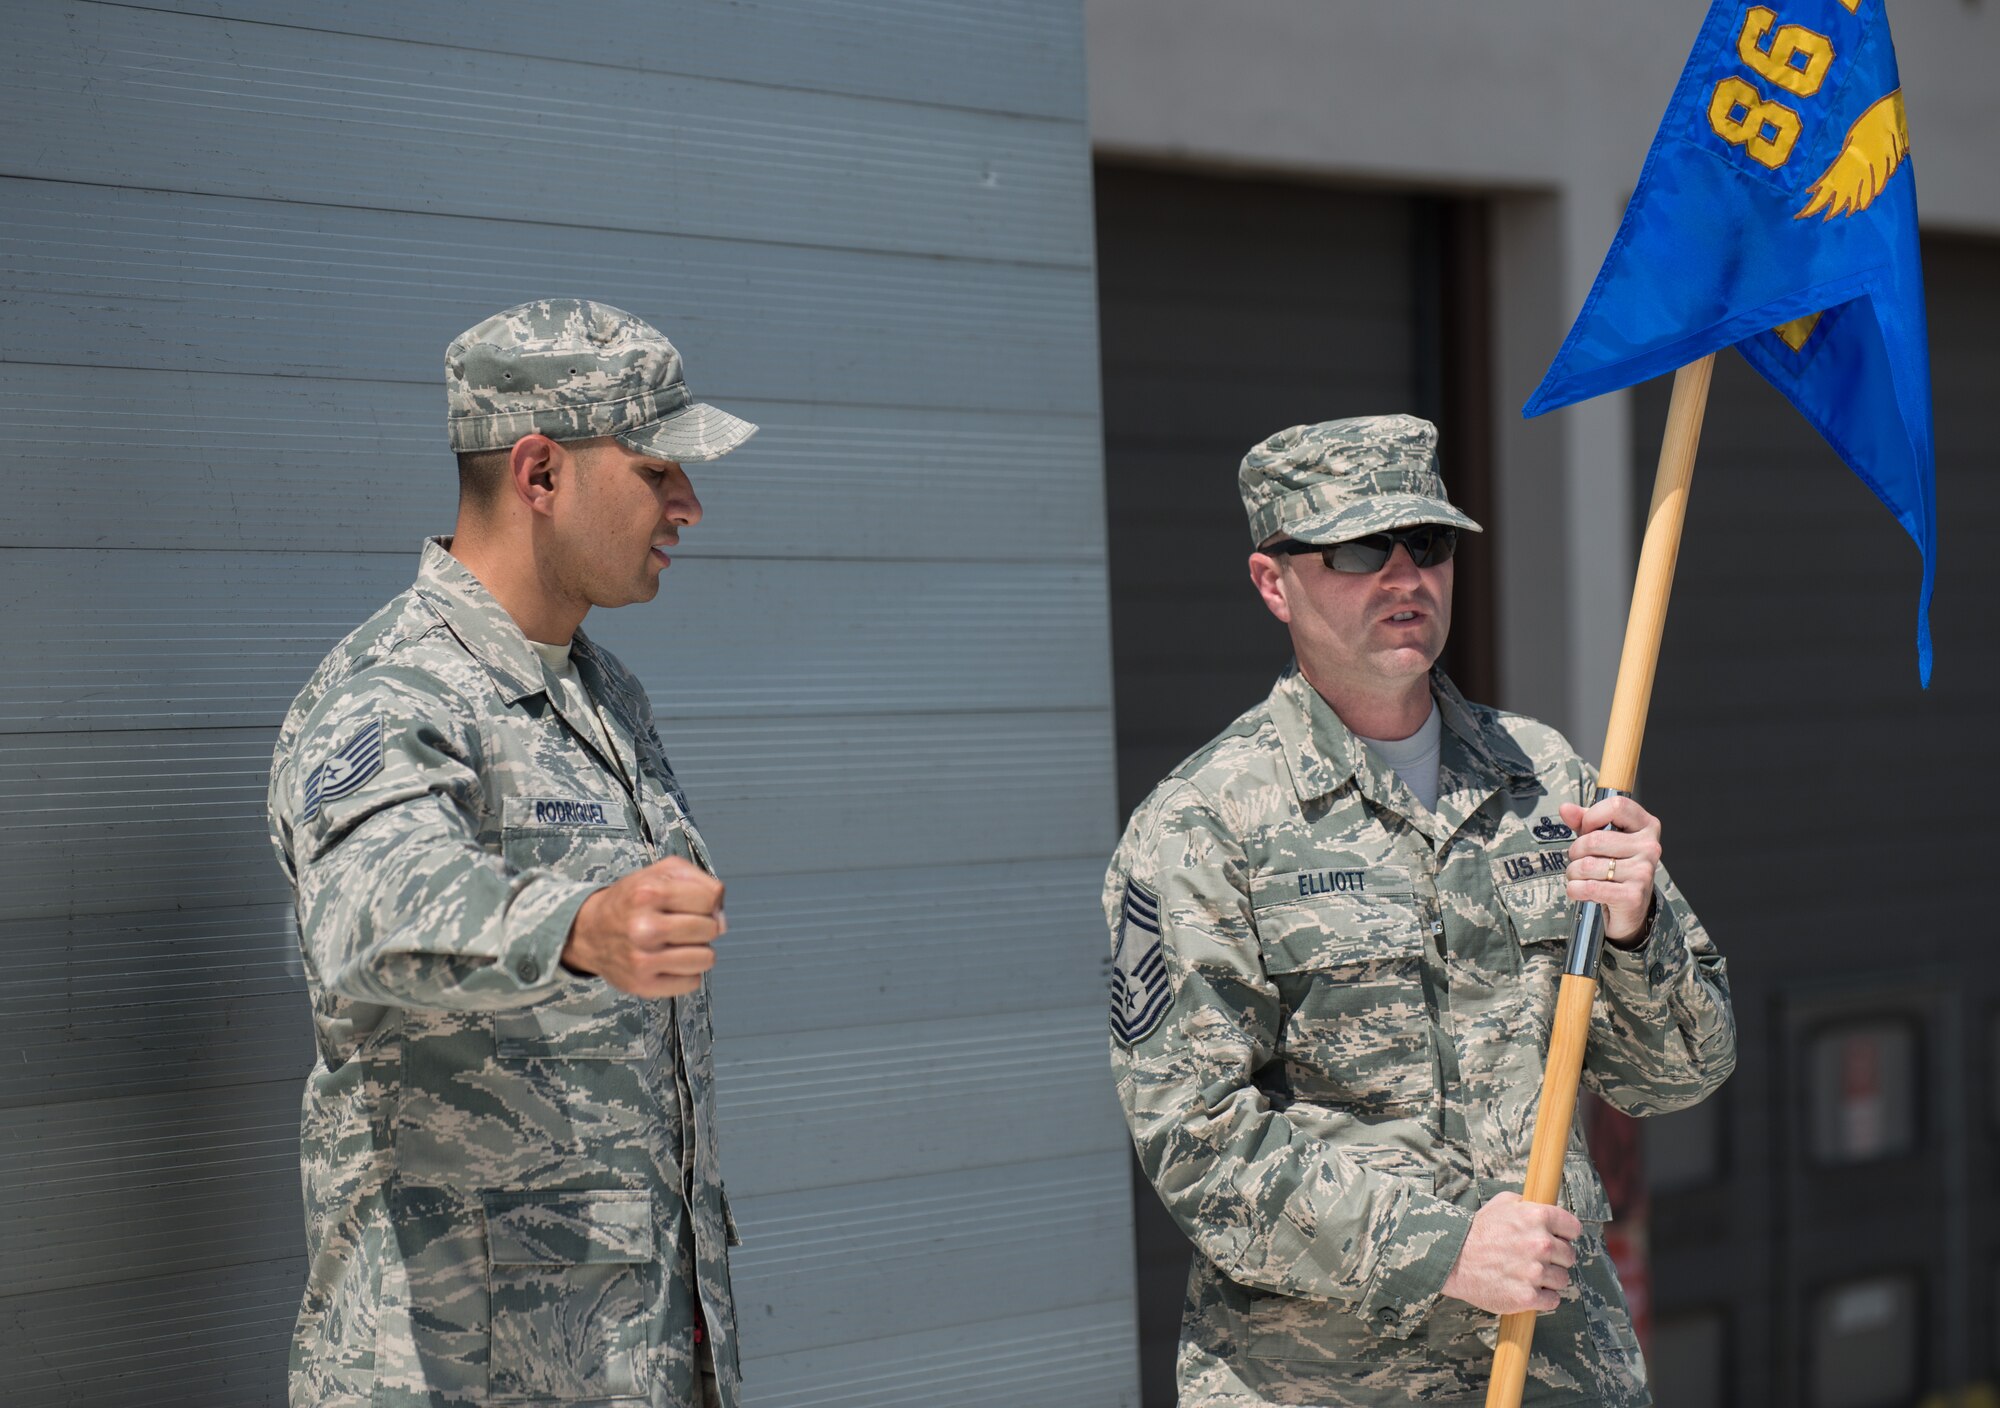 Tech. Sgt. Raul Rodriguez, 86th Airlift Wing protocol member, helps position Chief Master Sgt. Paul Elliott, 86th Logistics Readiness Group command chief, during a change of command dry-run July 17, 2014, at Ramstein Air Base, Germany. The wing protocol office is made up of four Airmen who provide support to approximately 22,000 military members and Department of Defense civilians. (U.S. Air Force photo/Senior Airman Jonathan Stefanko)